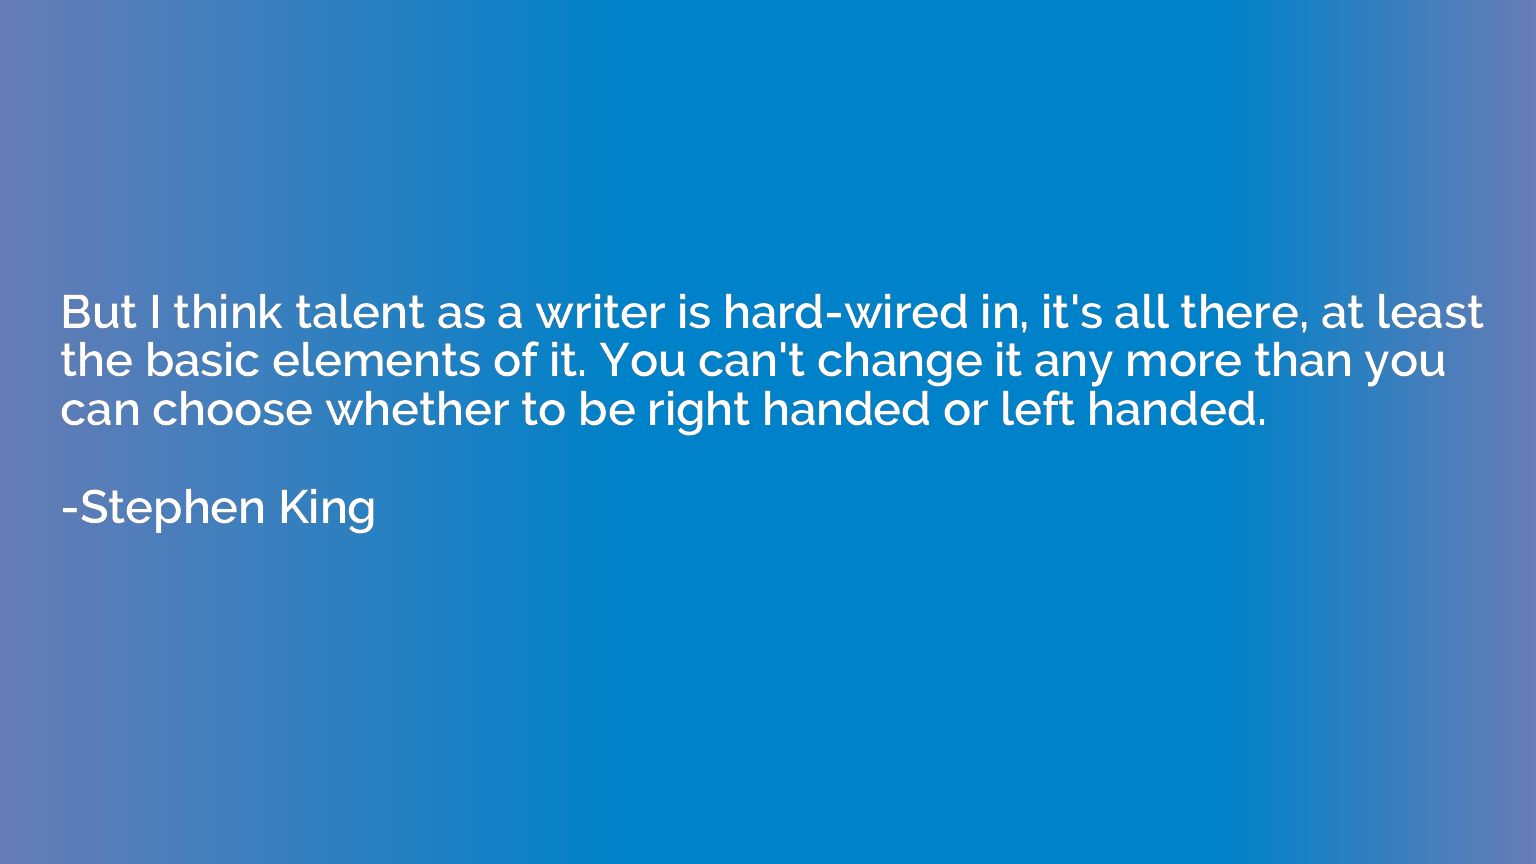 But I think talent as a writer is hard-wired in, it's all th